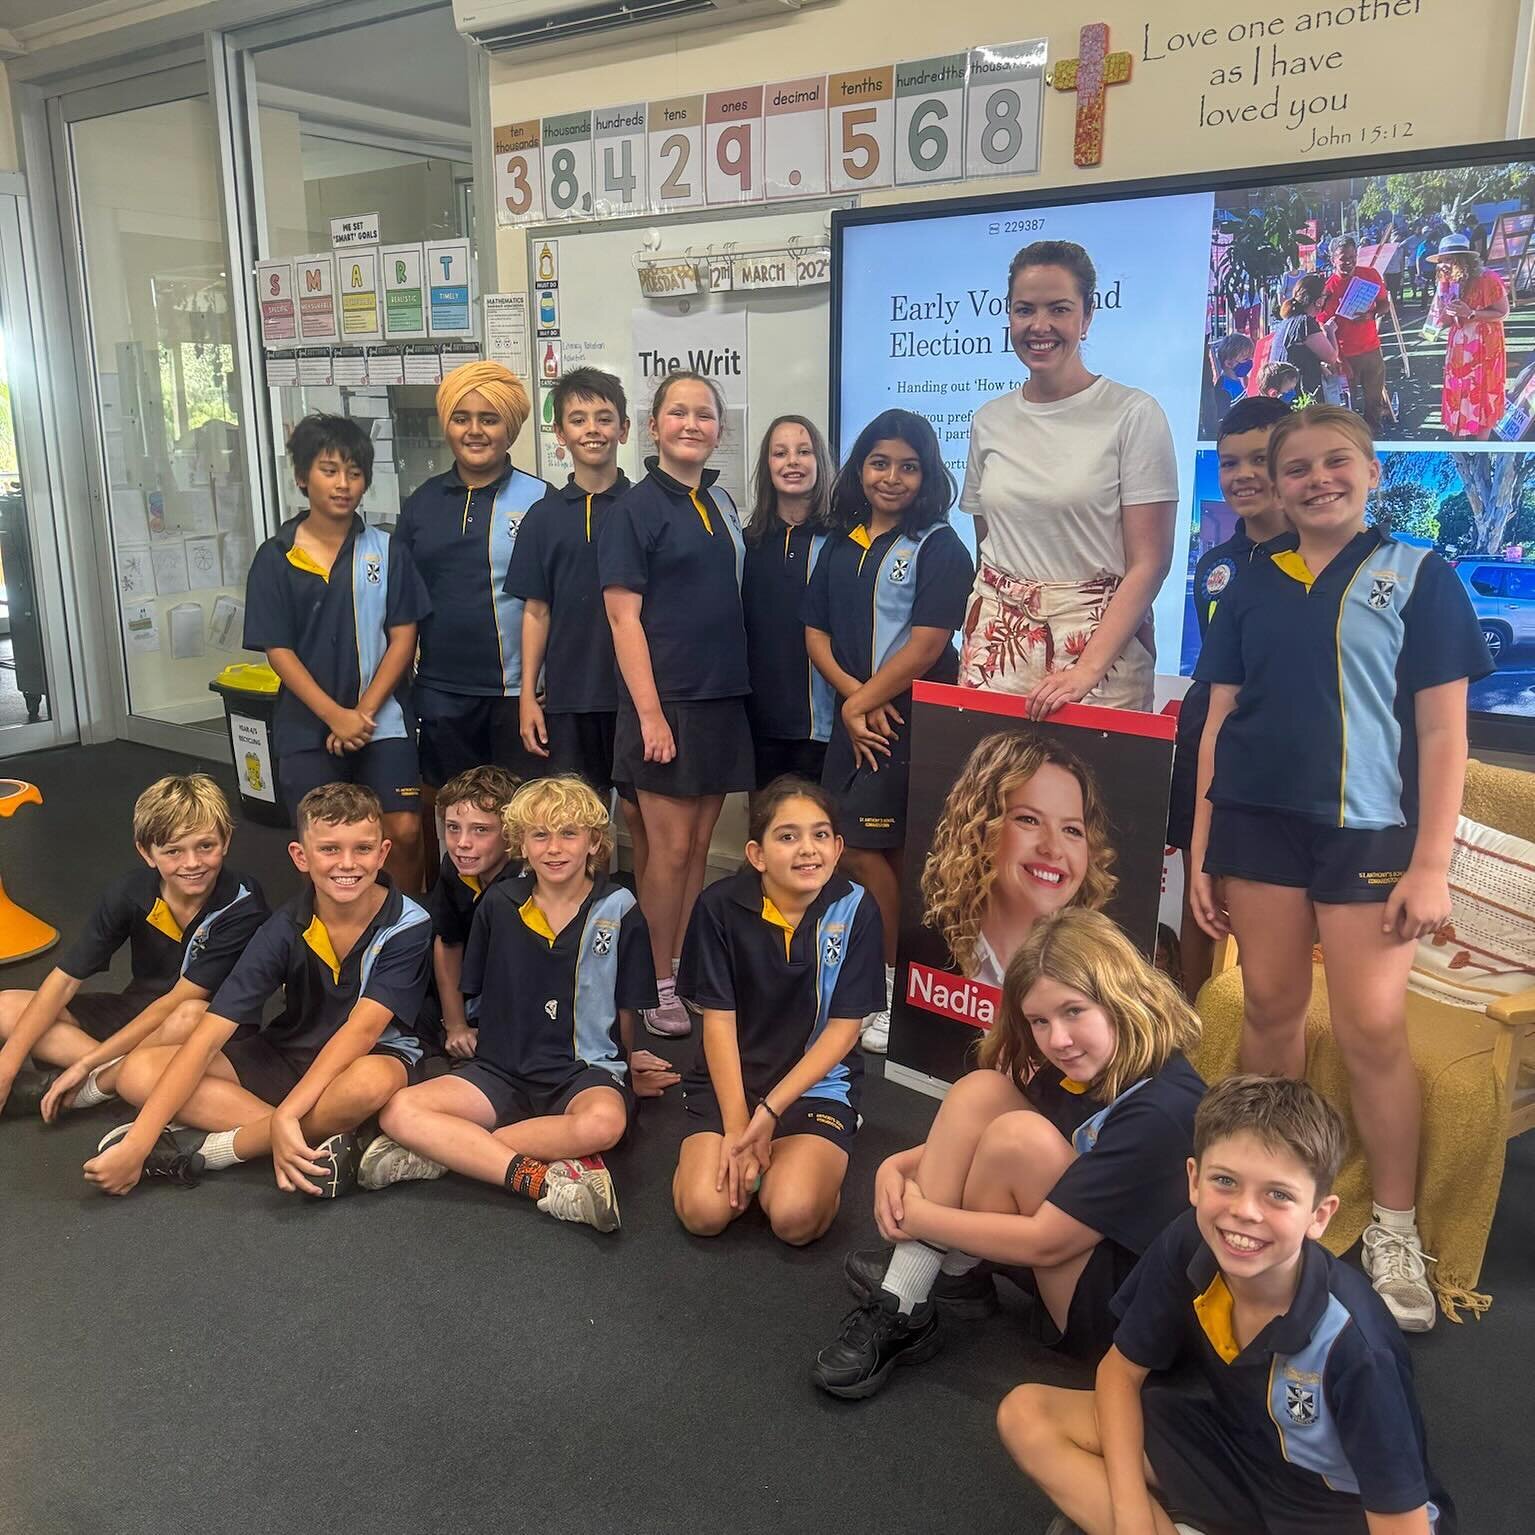 The Writs have been issued at St Anthonys School Edwardstown and candidates are about to nominate so I dropped by earlier this week to share some campaign tips!